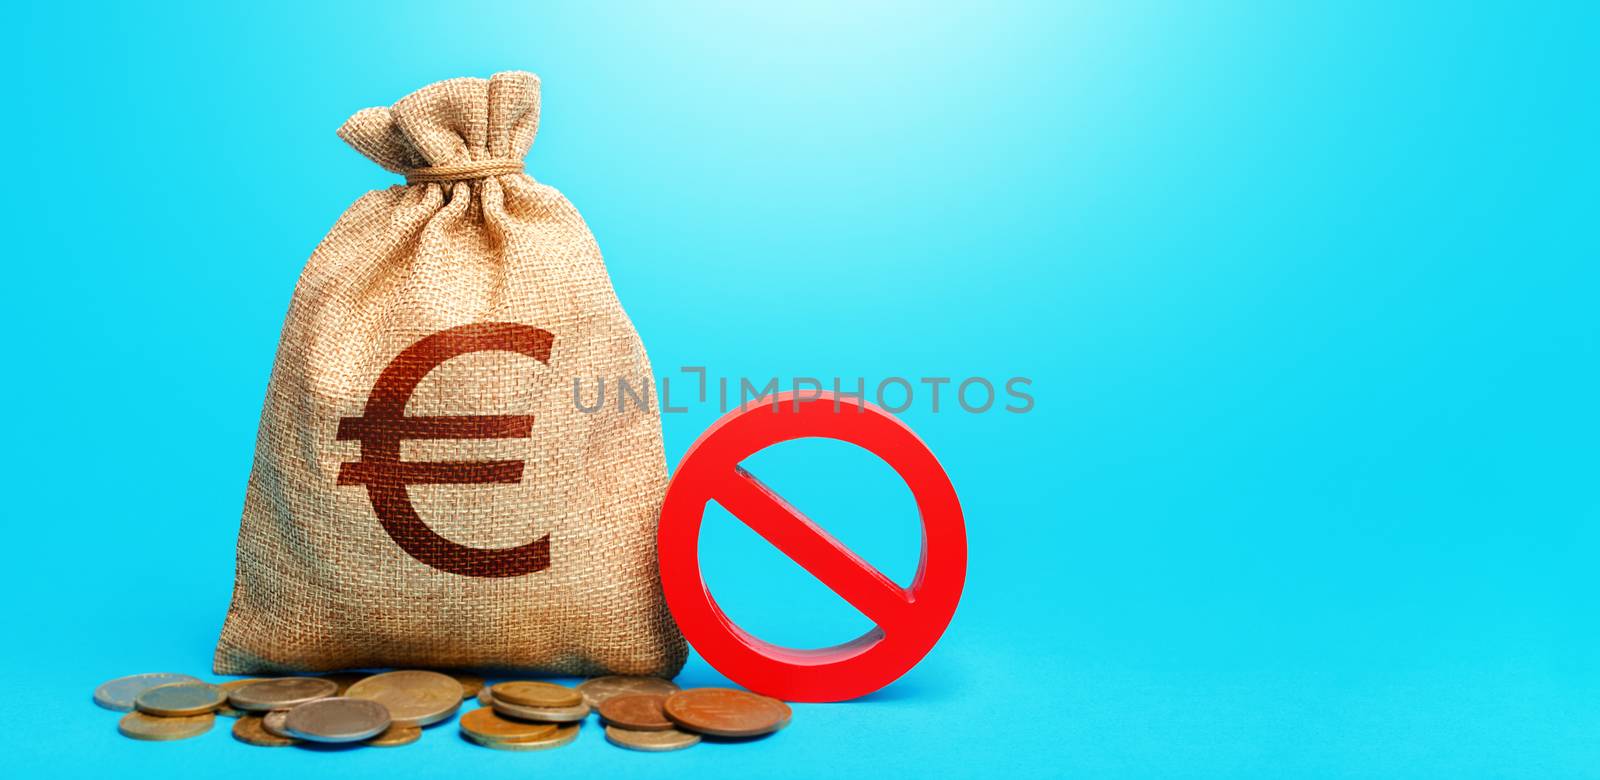 Euro money bag and red prohibition sign NO. Forced withdrawal of deposits. Monetary restrictions, freezing seizure of bank accounts. Termination funding for projects. Monitoring suspicious money flows